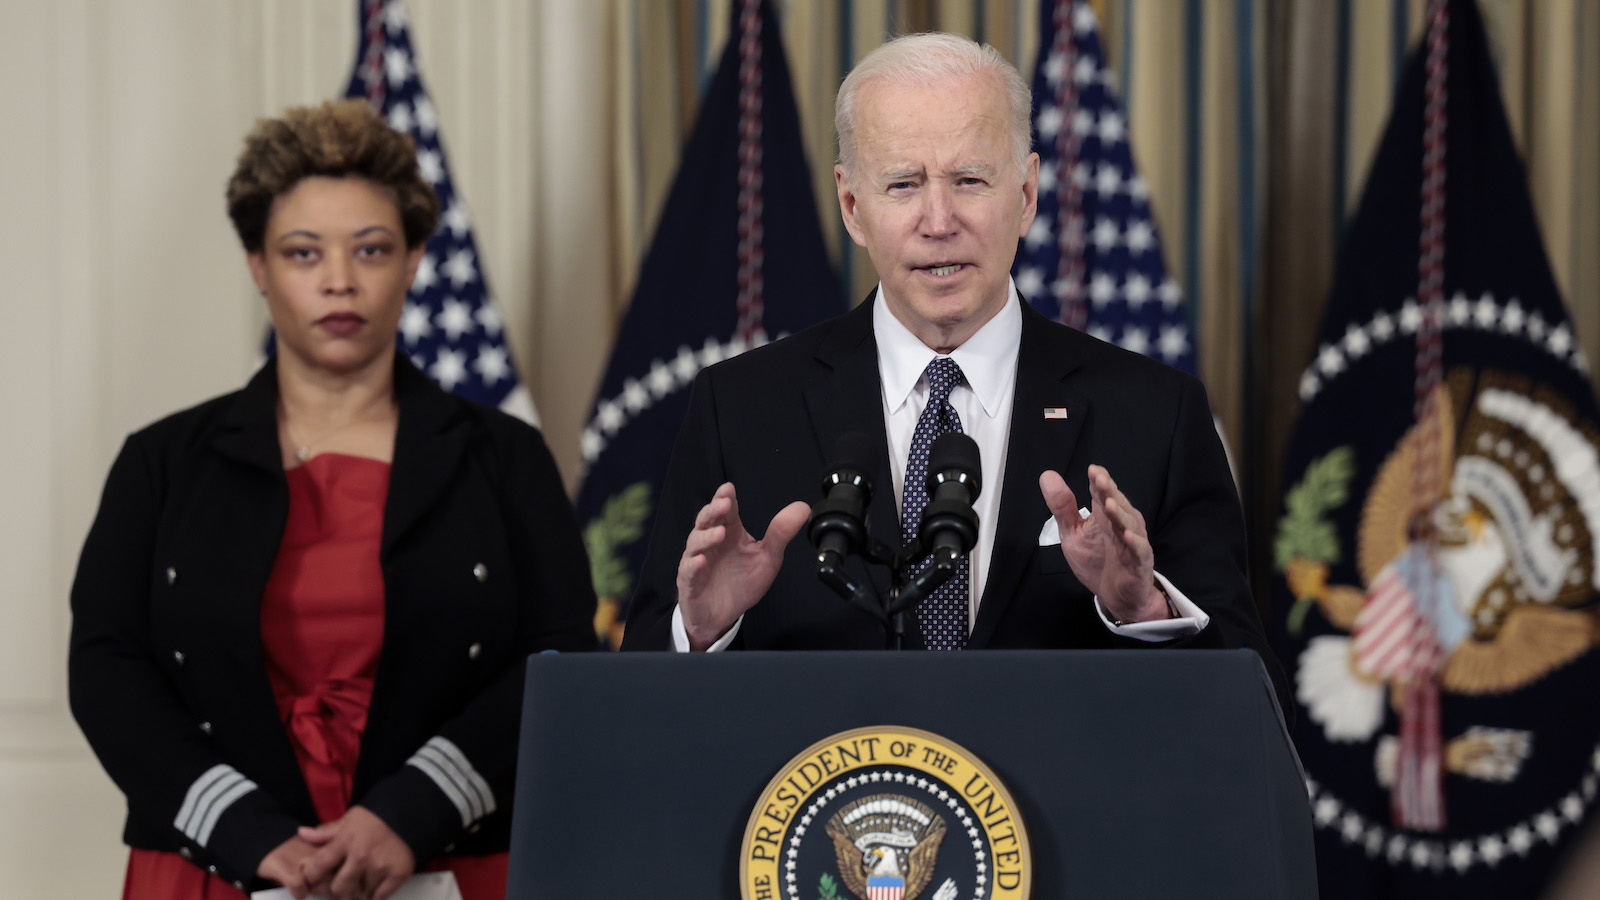 U.S. President Joe Biden speaks along side Director of the Office of Management and Budget Shalanda Young as he introduces his budget request for fiscal year 2023.